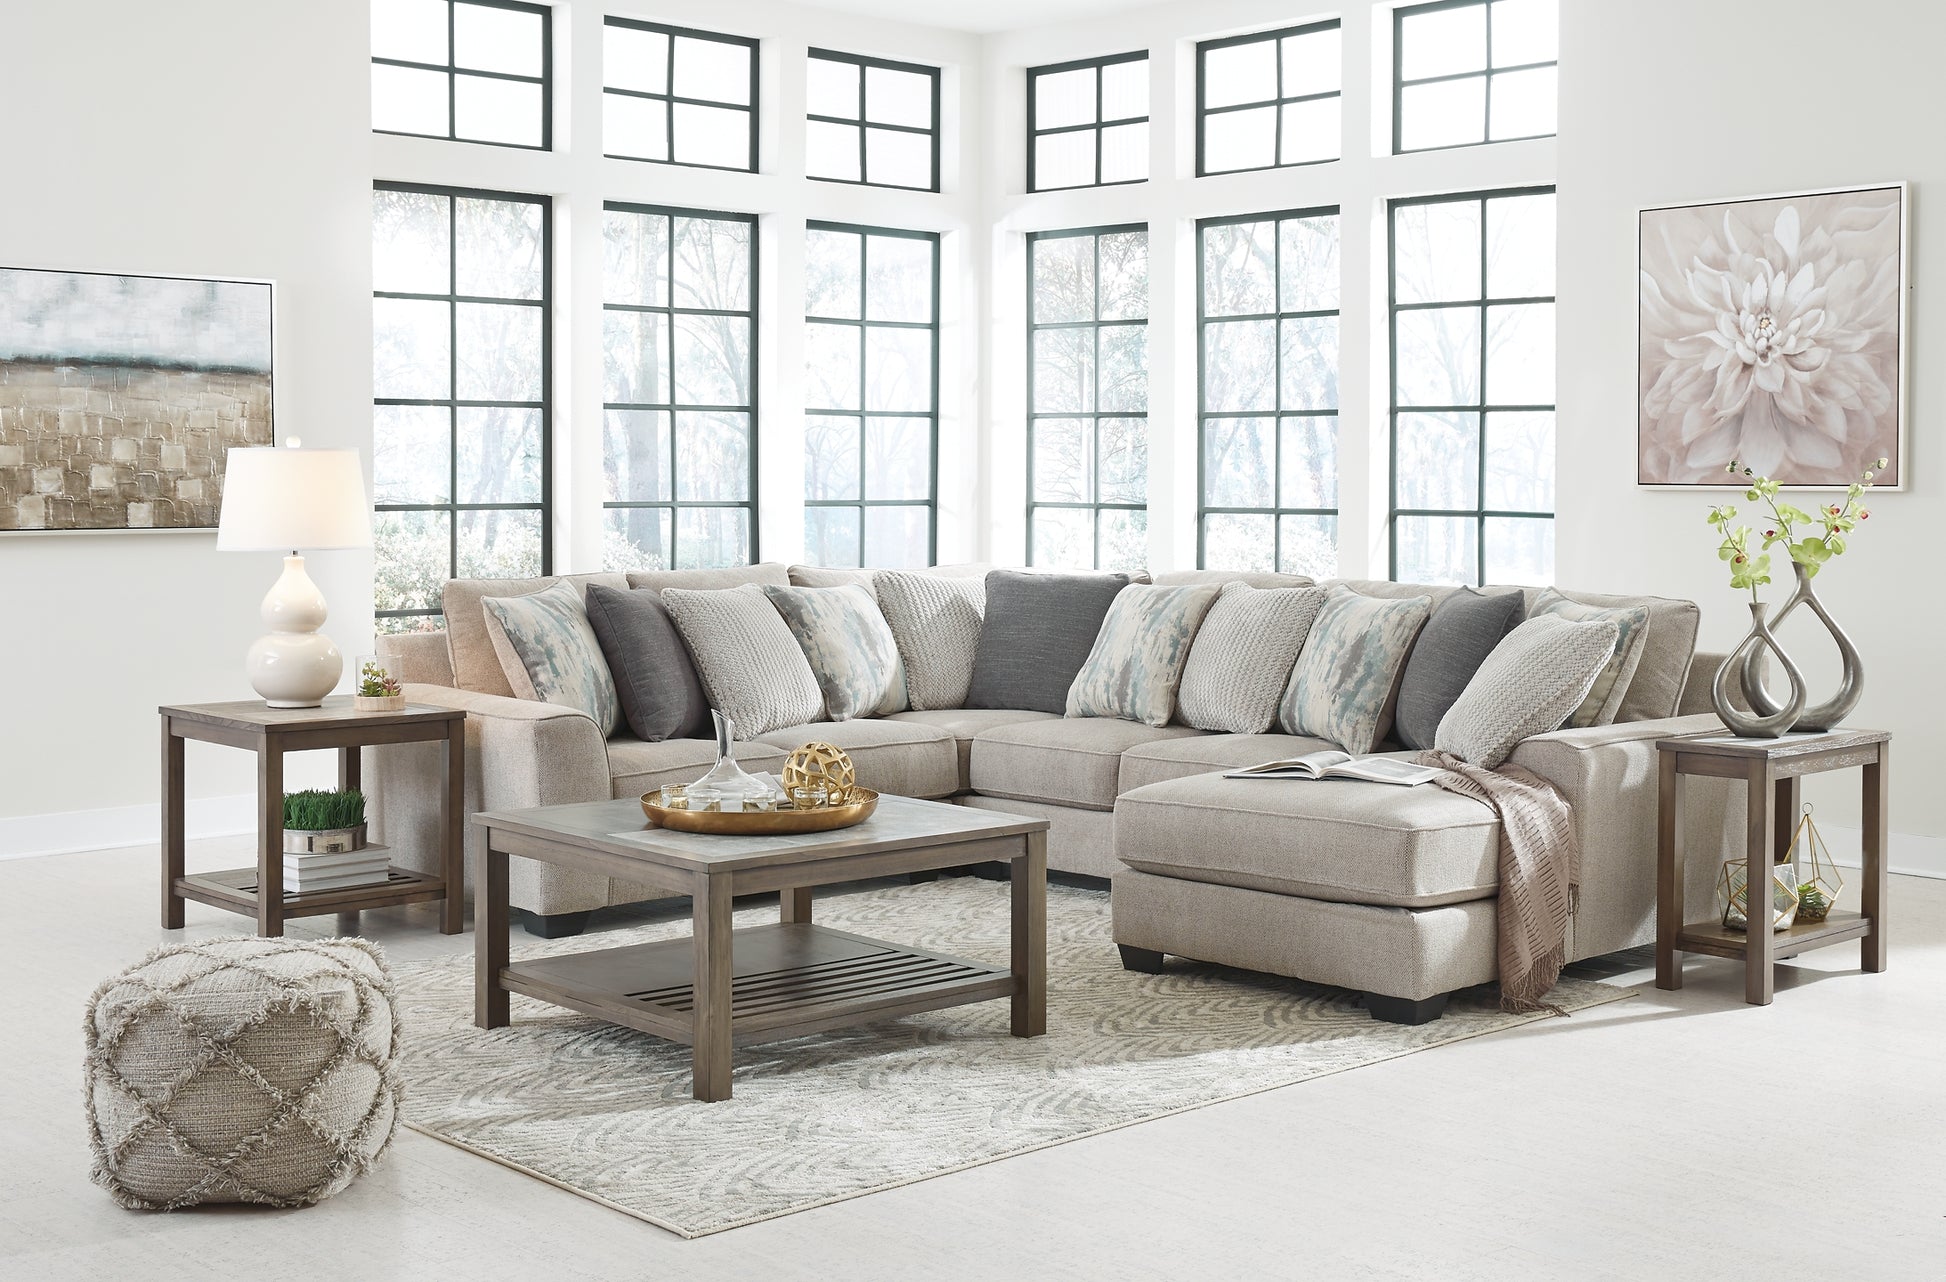 Ardsley 4-Piece Sectional with Chaise Wilson Furniture (OH)  in Bridgeport, Ohio. Serving Bridgeport, Yorkville, Bellaire, & Avondale